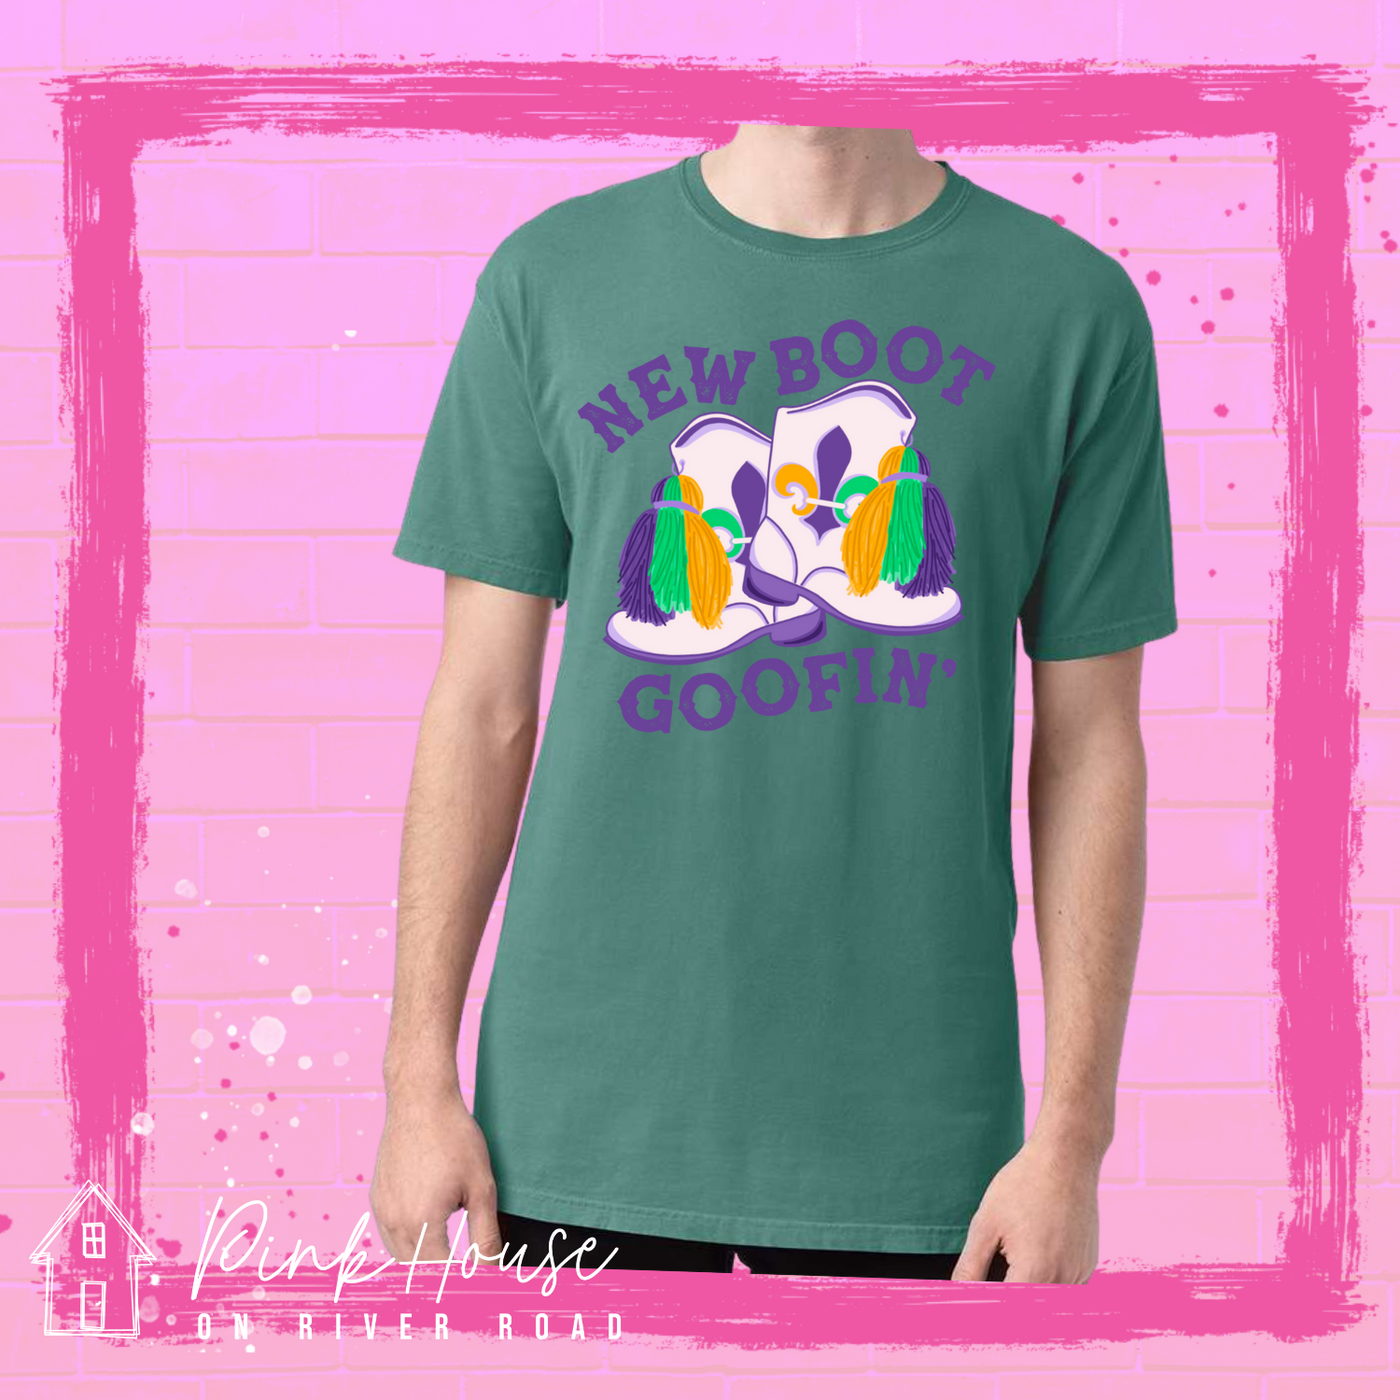 A seafoam green tee with a graphic. Graphic is of a pair of majorette boots, the boots have a tassel and fleur de lis both in gold, green and purple. the words New Boot are above the boots and the word goofin' is below thee boots the words are in purple.